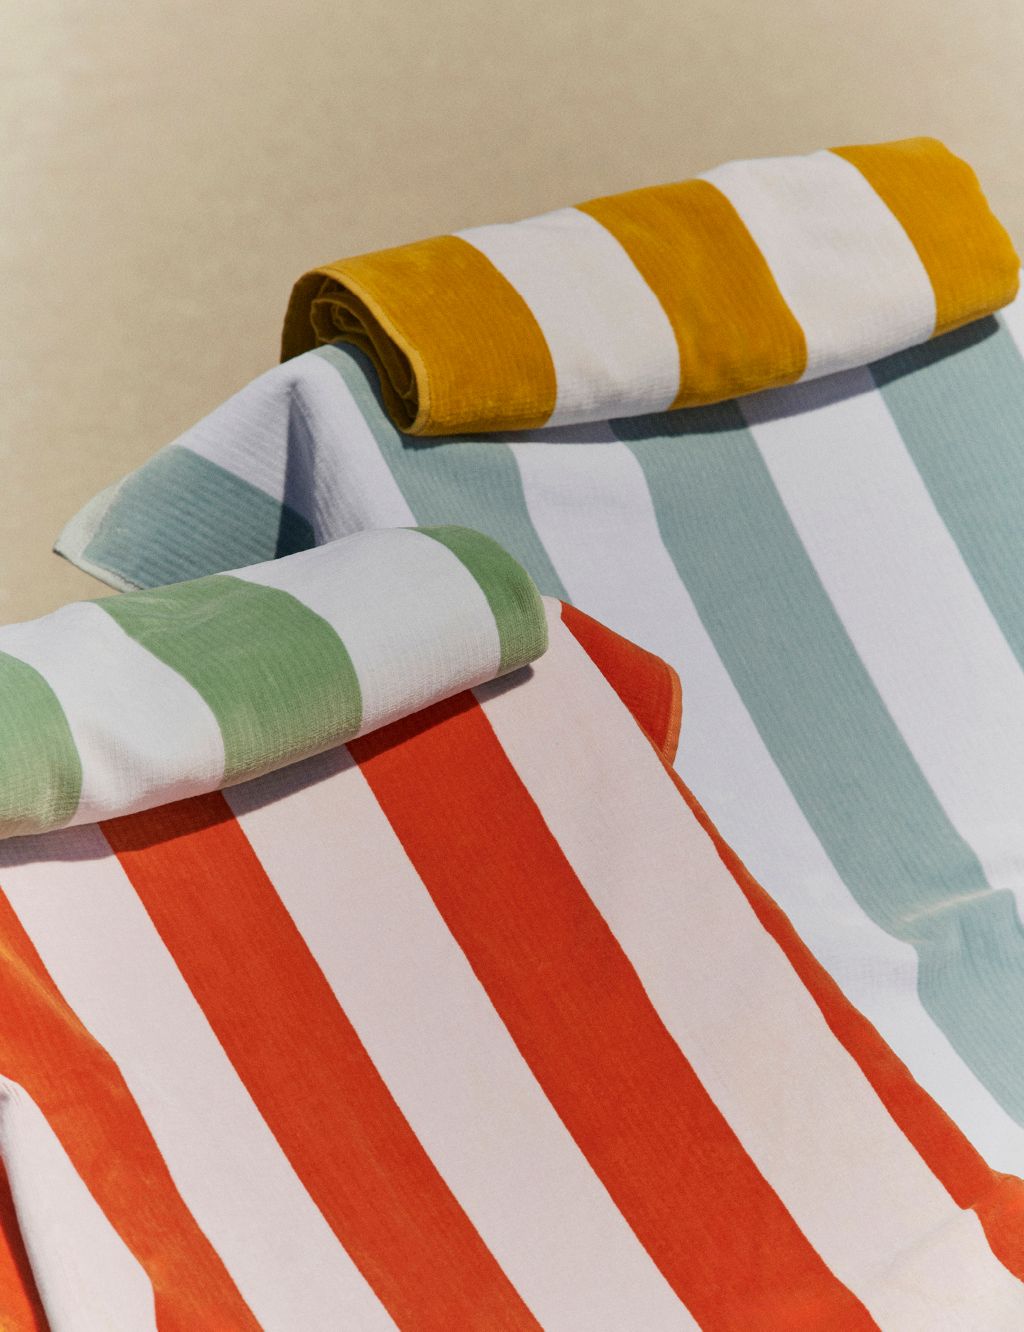 Pure Cotton Striped Sand Resistant Beach Towel 4 of 5